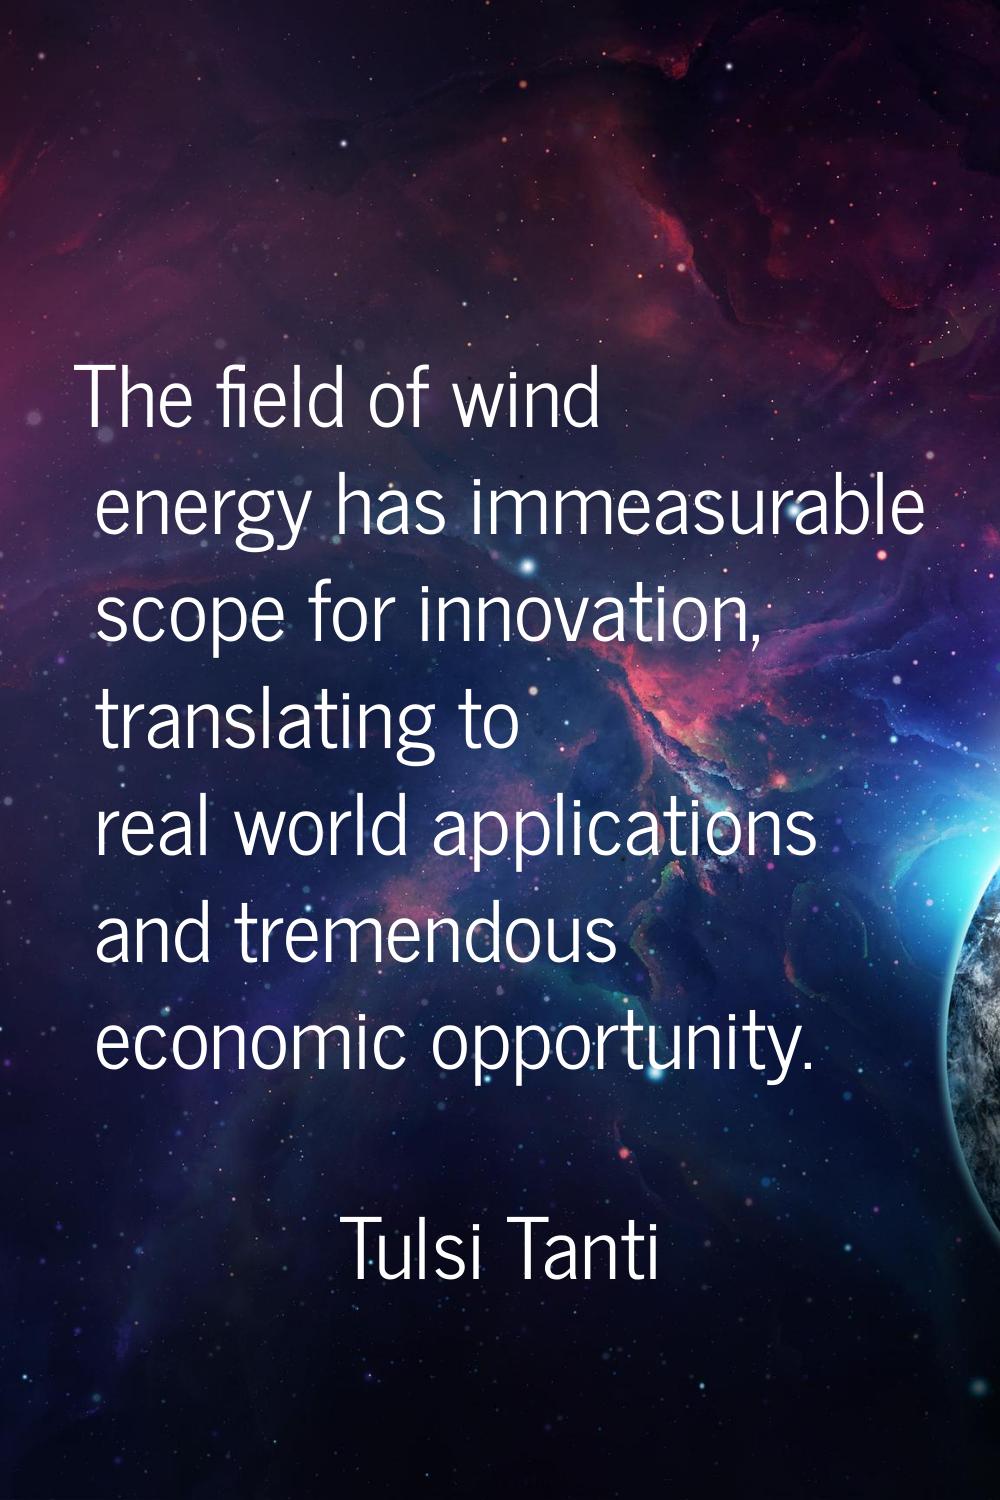 The field of wind energy has immeasurable scope for innovation, translating to real world applicati